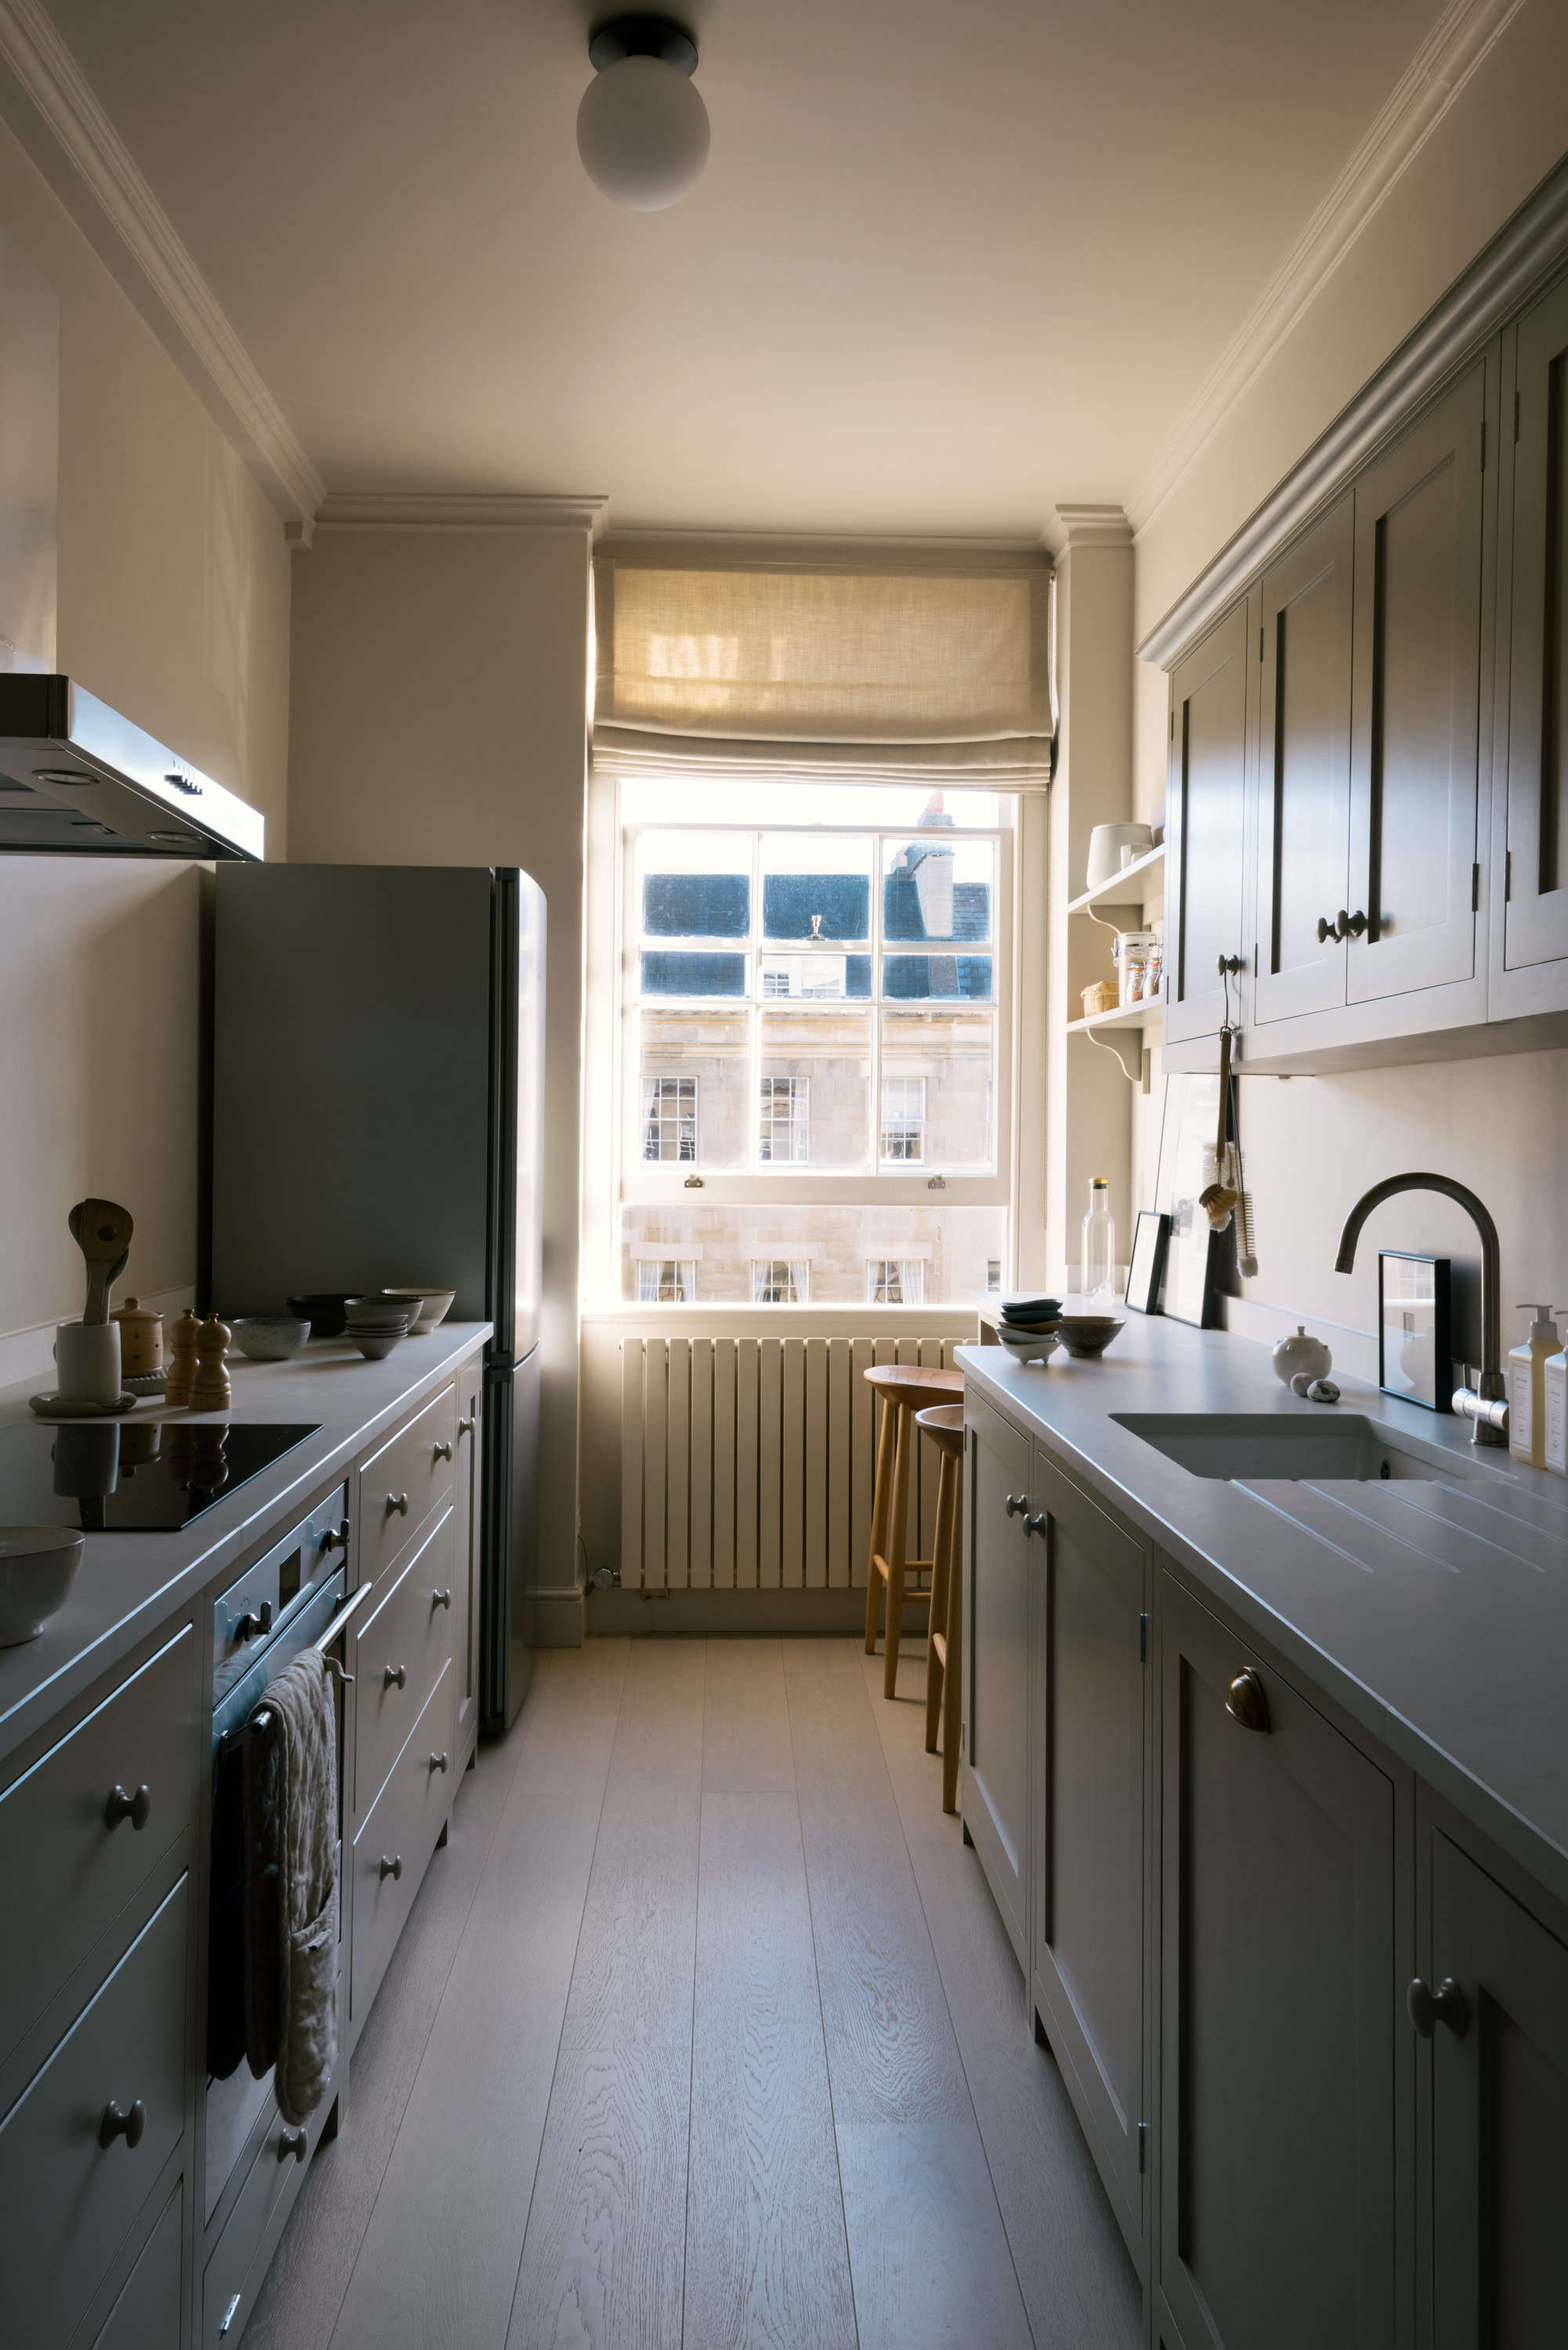 Shaker Galley Kitchen a Stylish Small Design by deVol for the ...